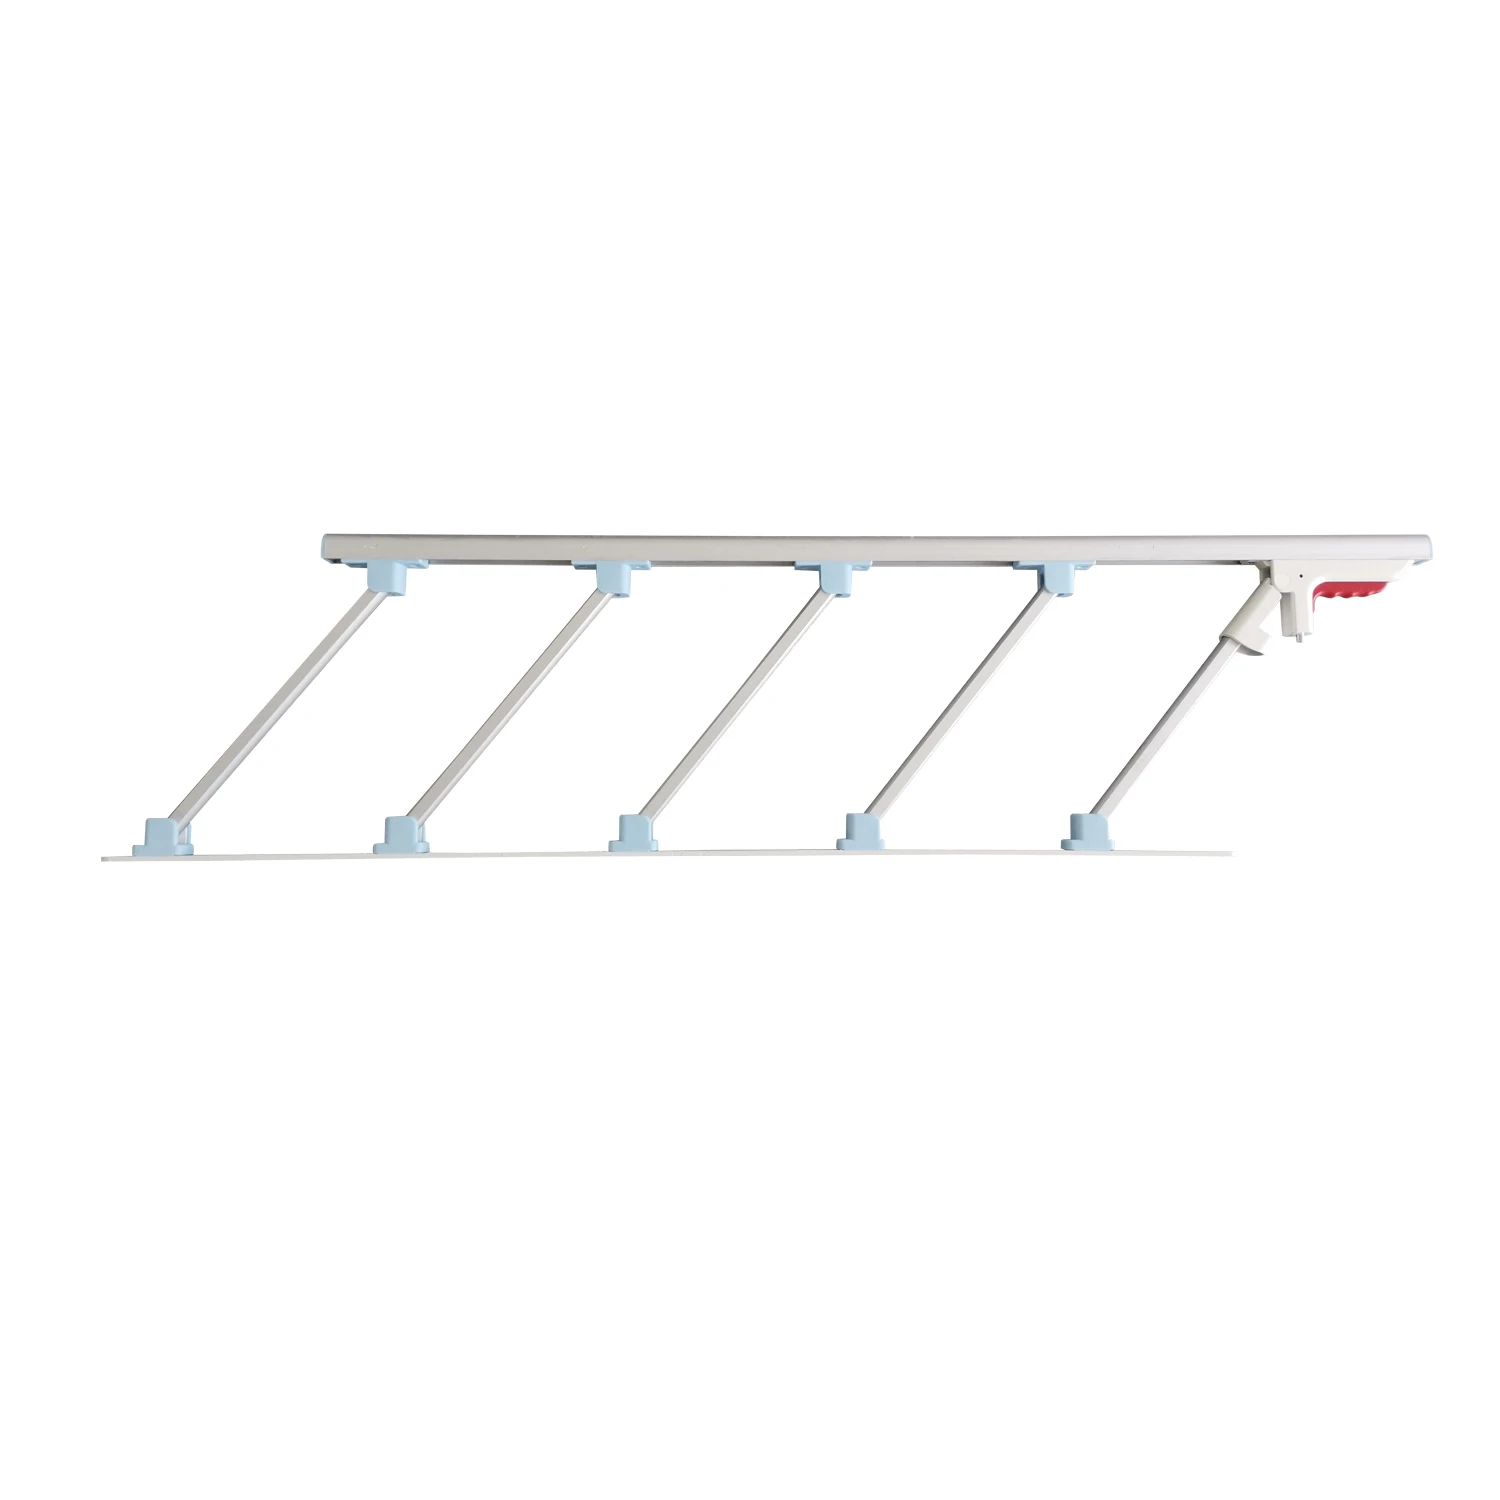 Aluminium Alloy Hospital Bed Side Rail Collapsible Hospital Bed Guard Rails